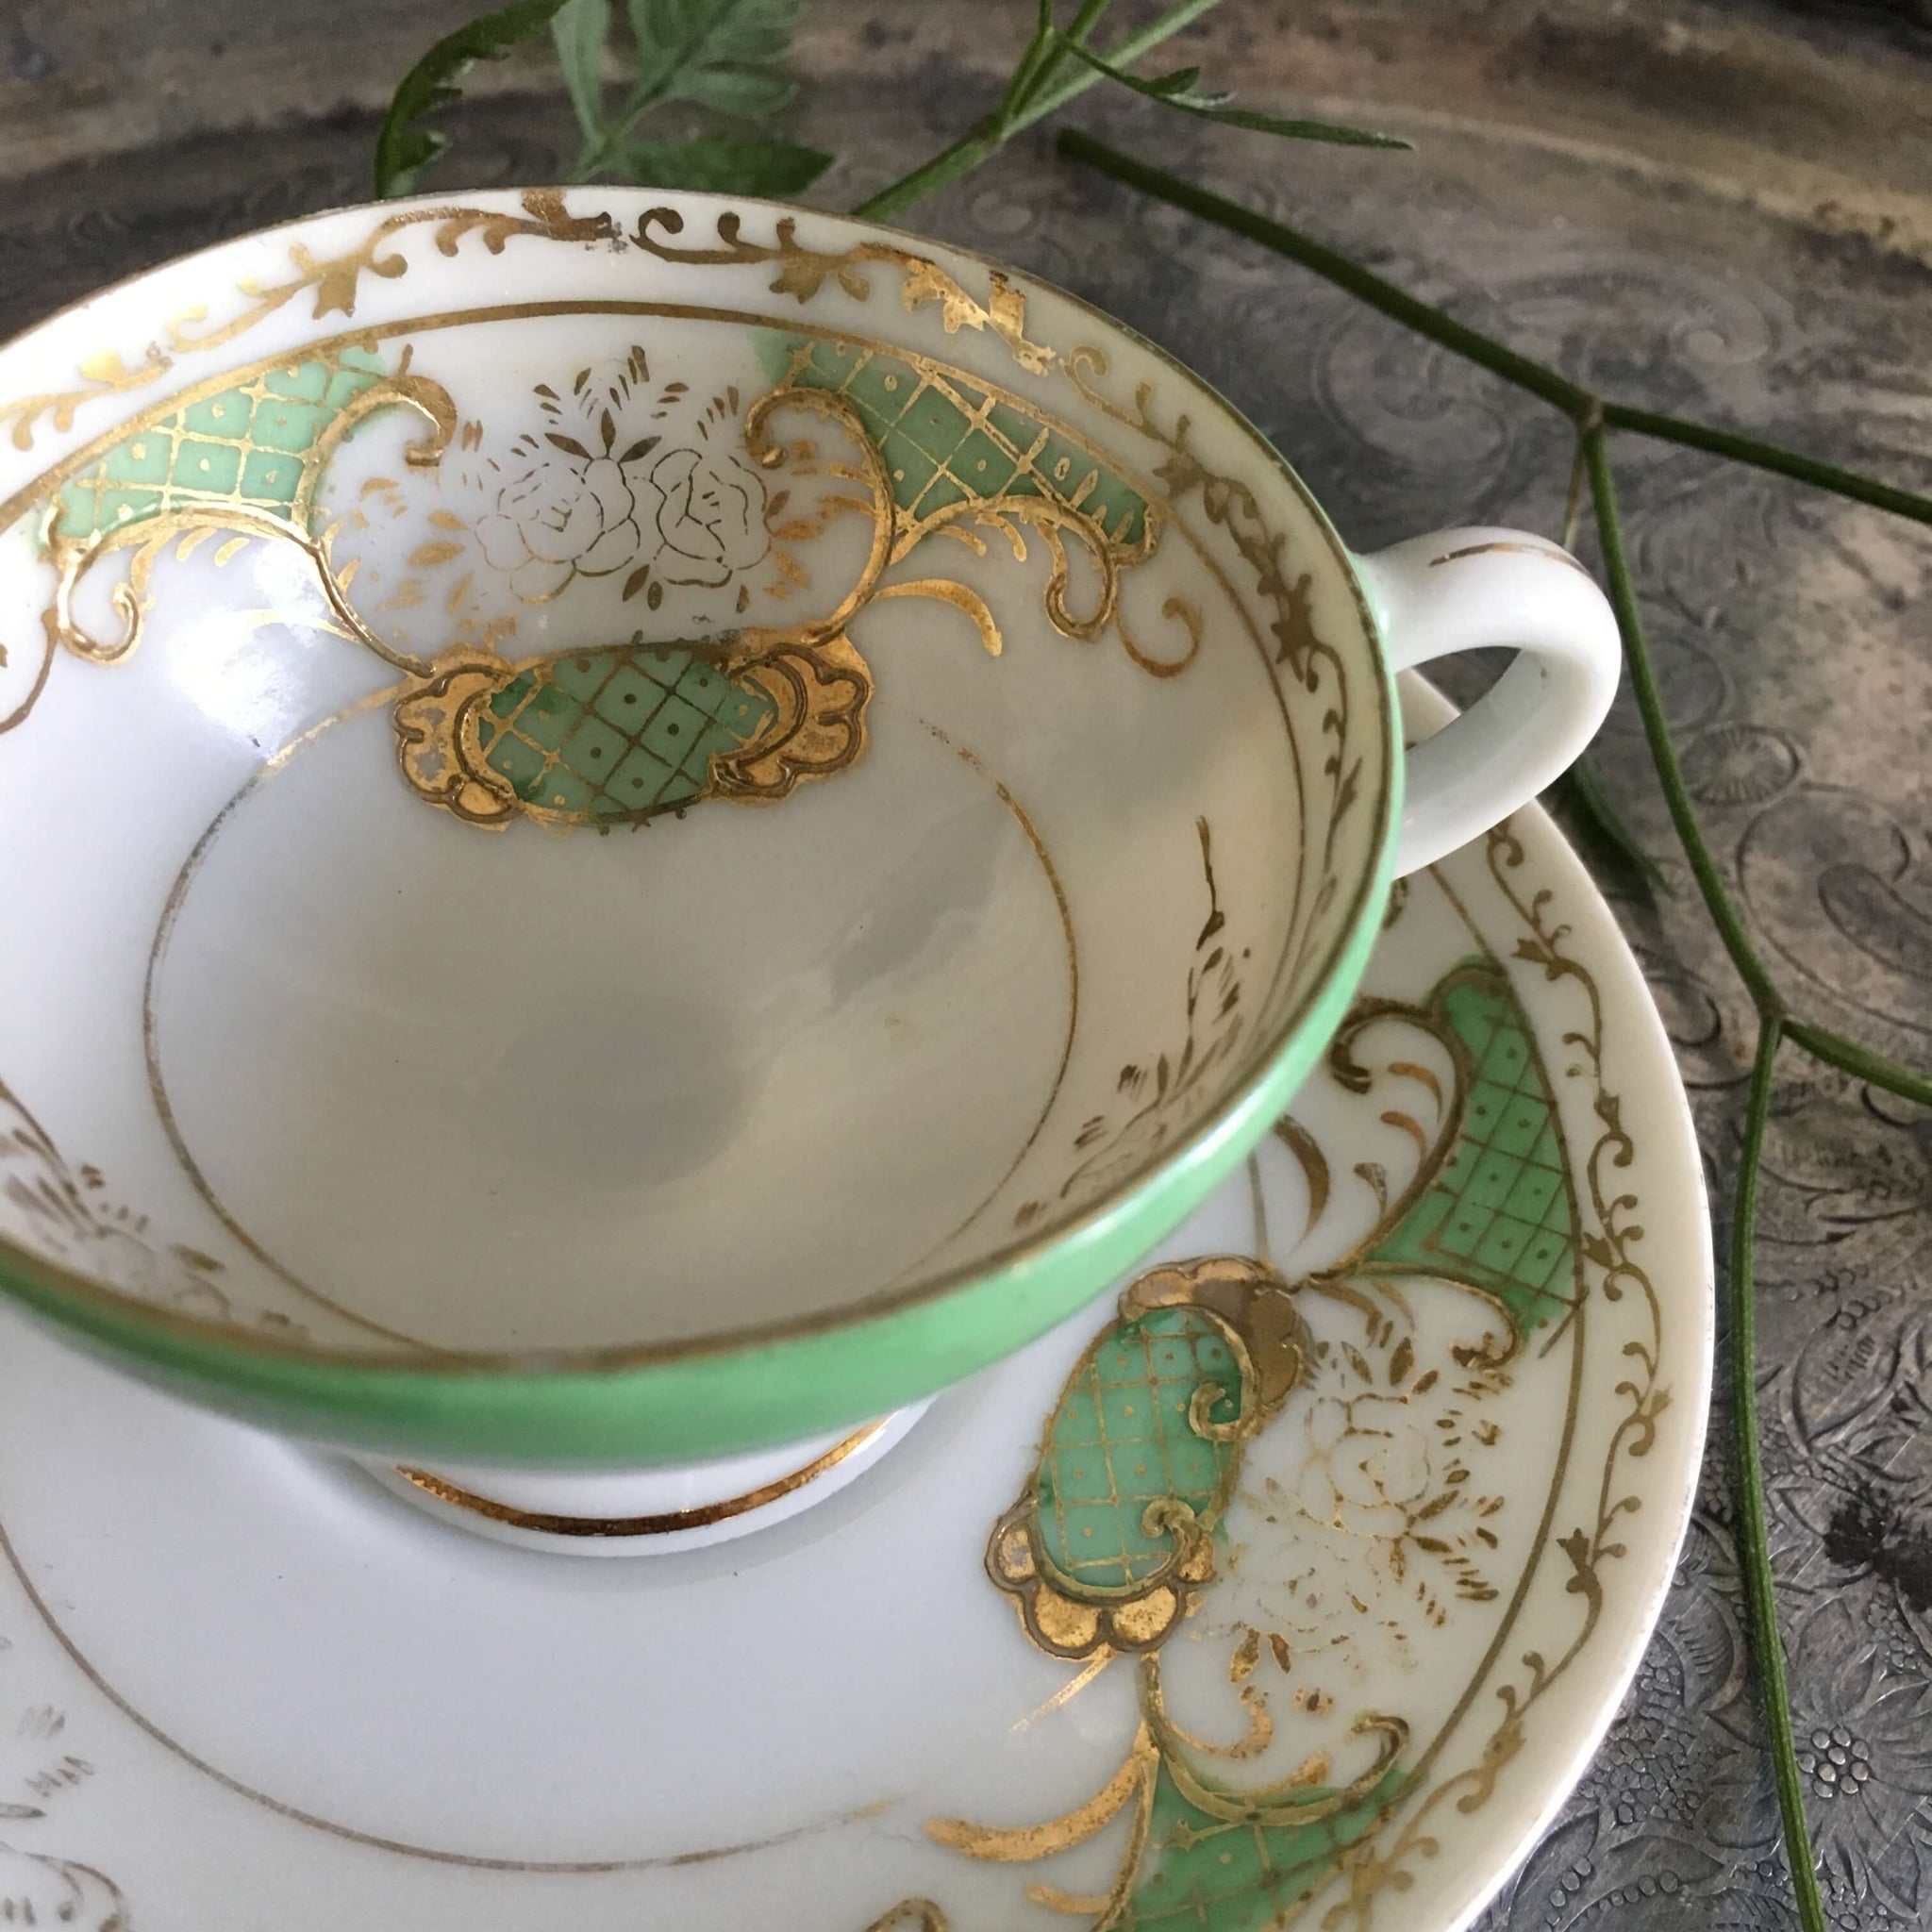 Vintage Royal Sealy Demitasse Cup & Saucer - Made in Occupied Japan circa 1945-1952 - Green and Gold